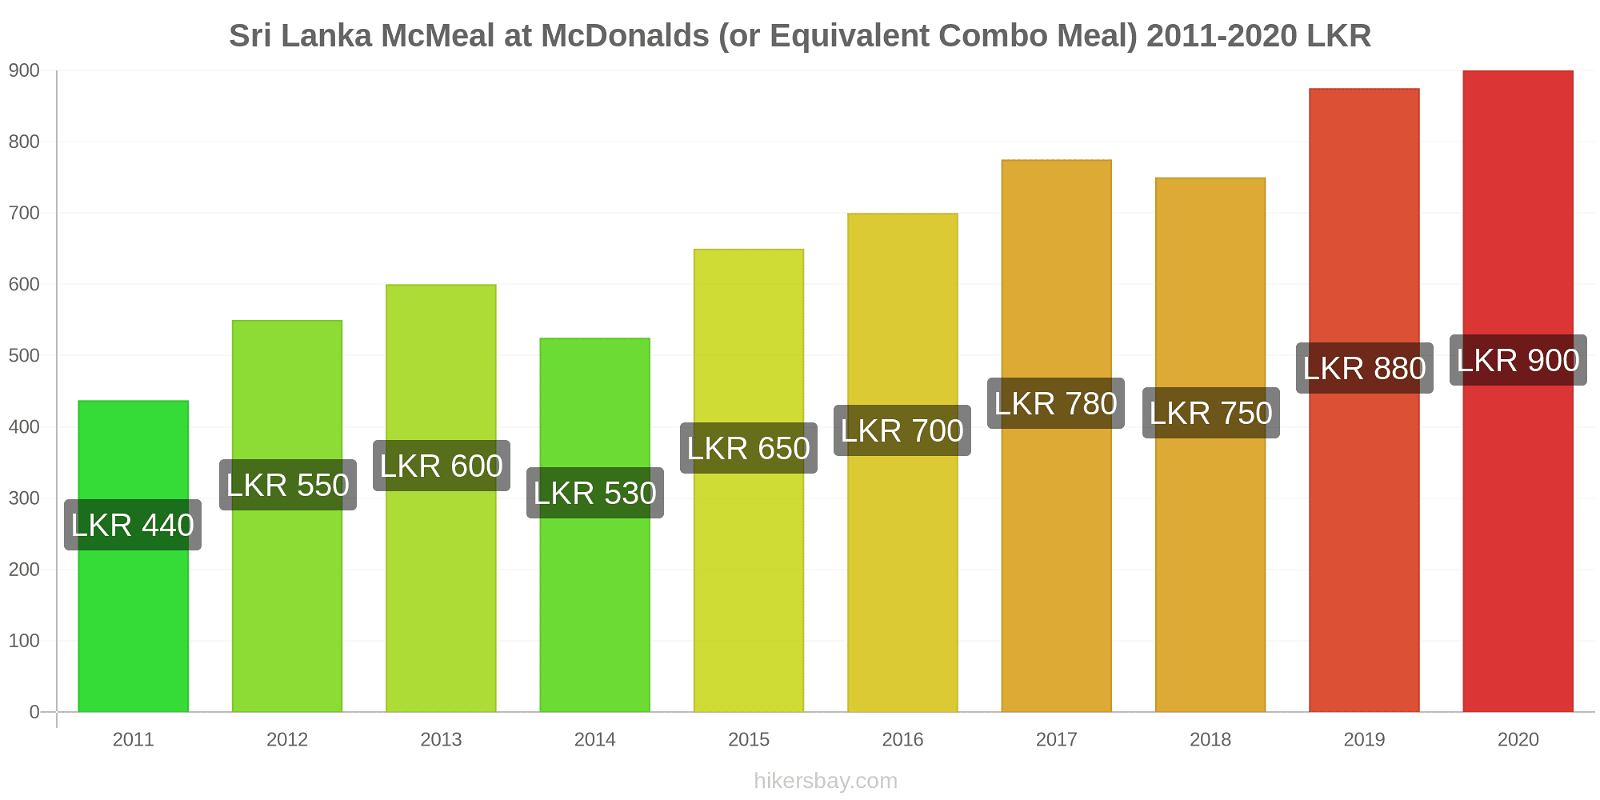 Sri Lanka price changes McMeal at McDonalds (or Equivalent Combo Meal) hikersbay.com